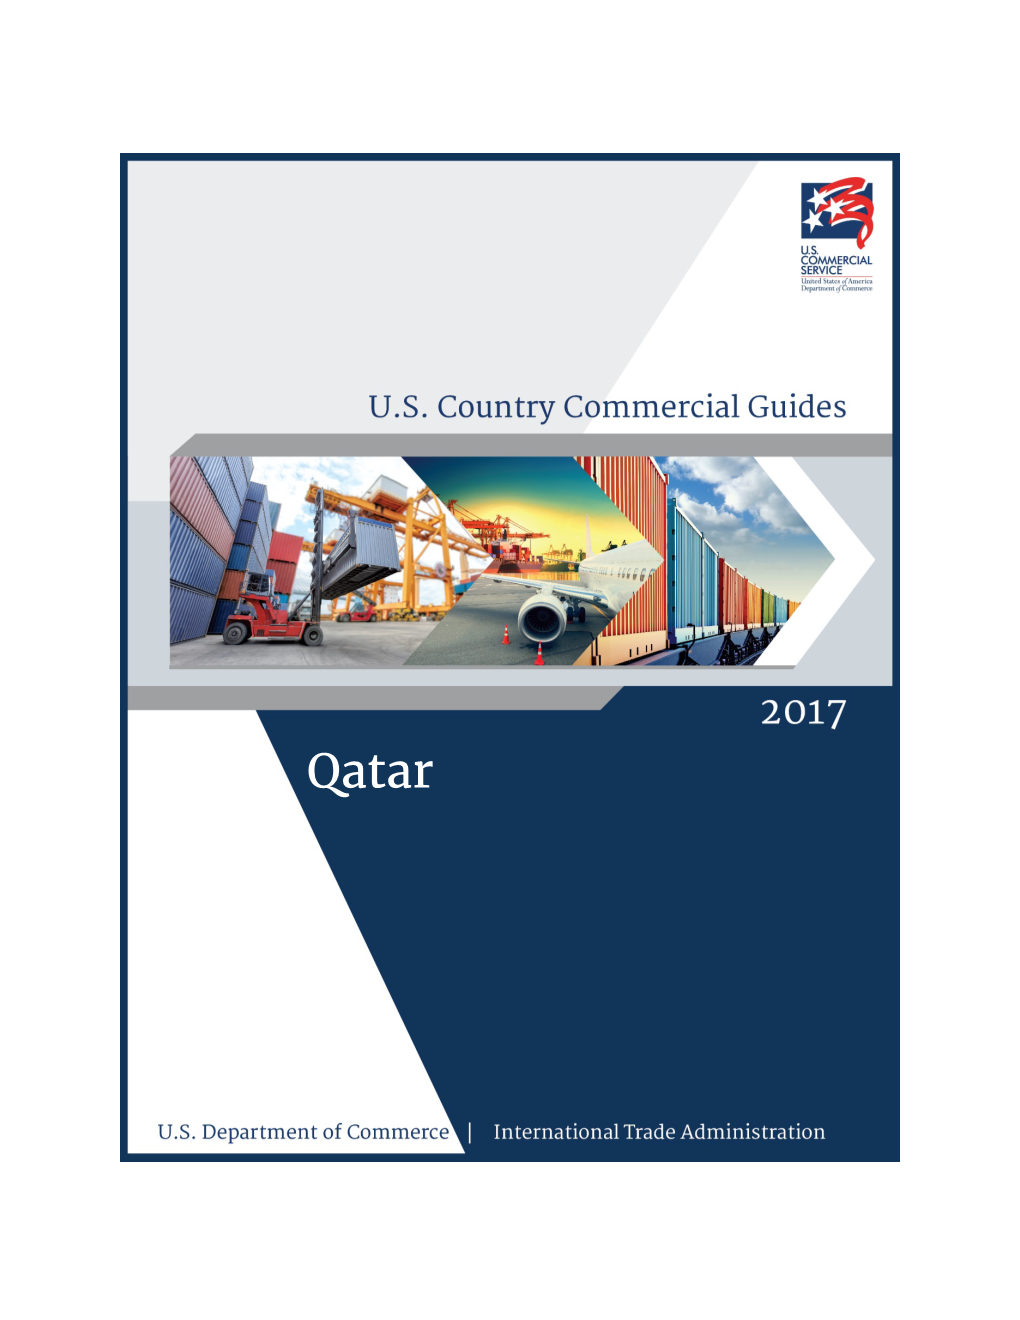 Qatar Commercial Guide